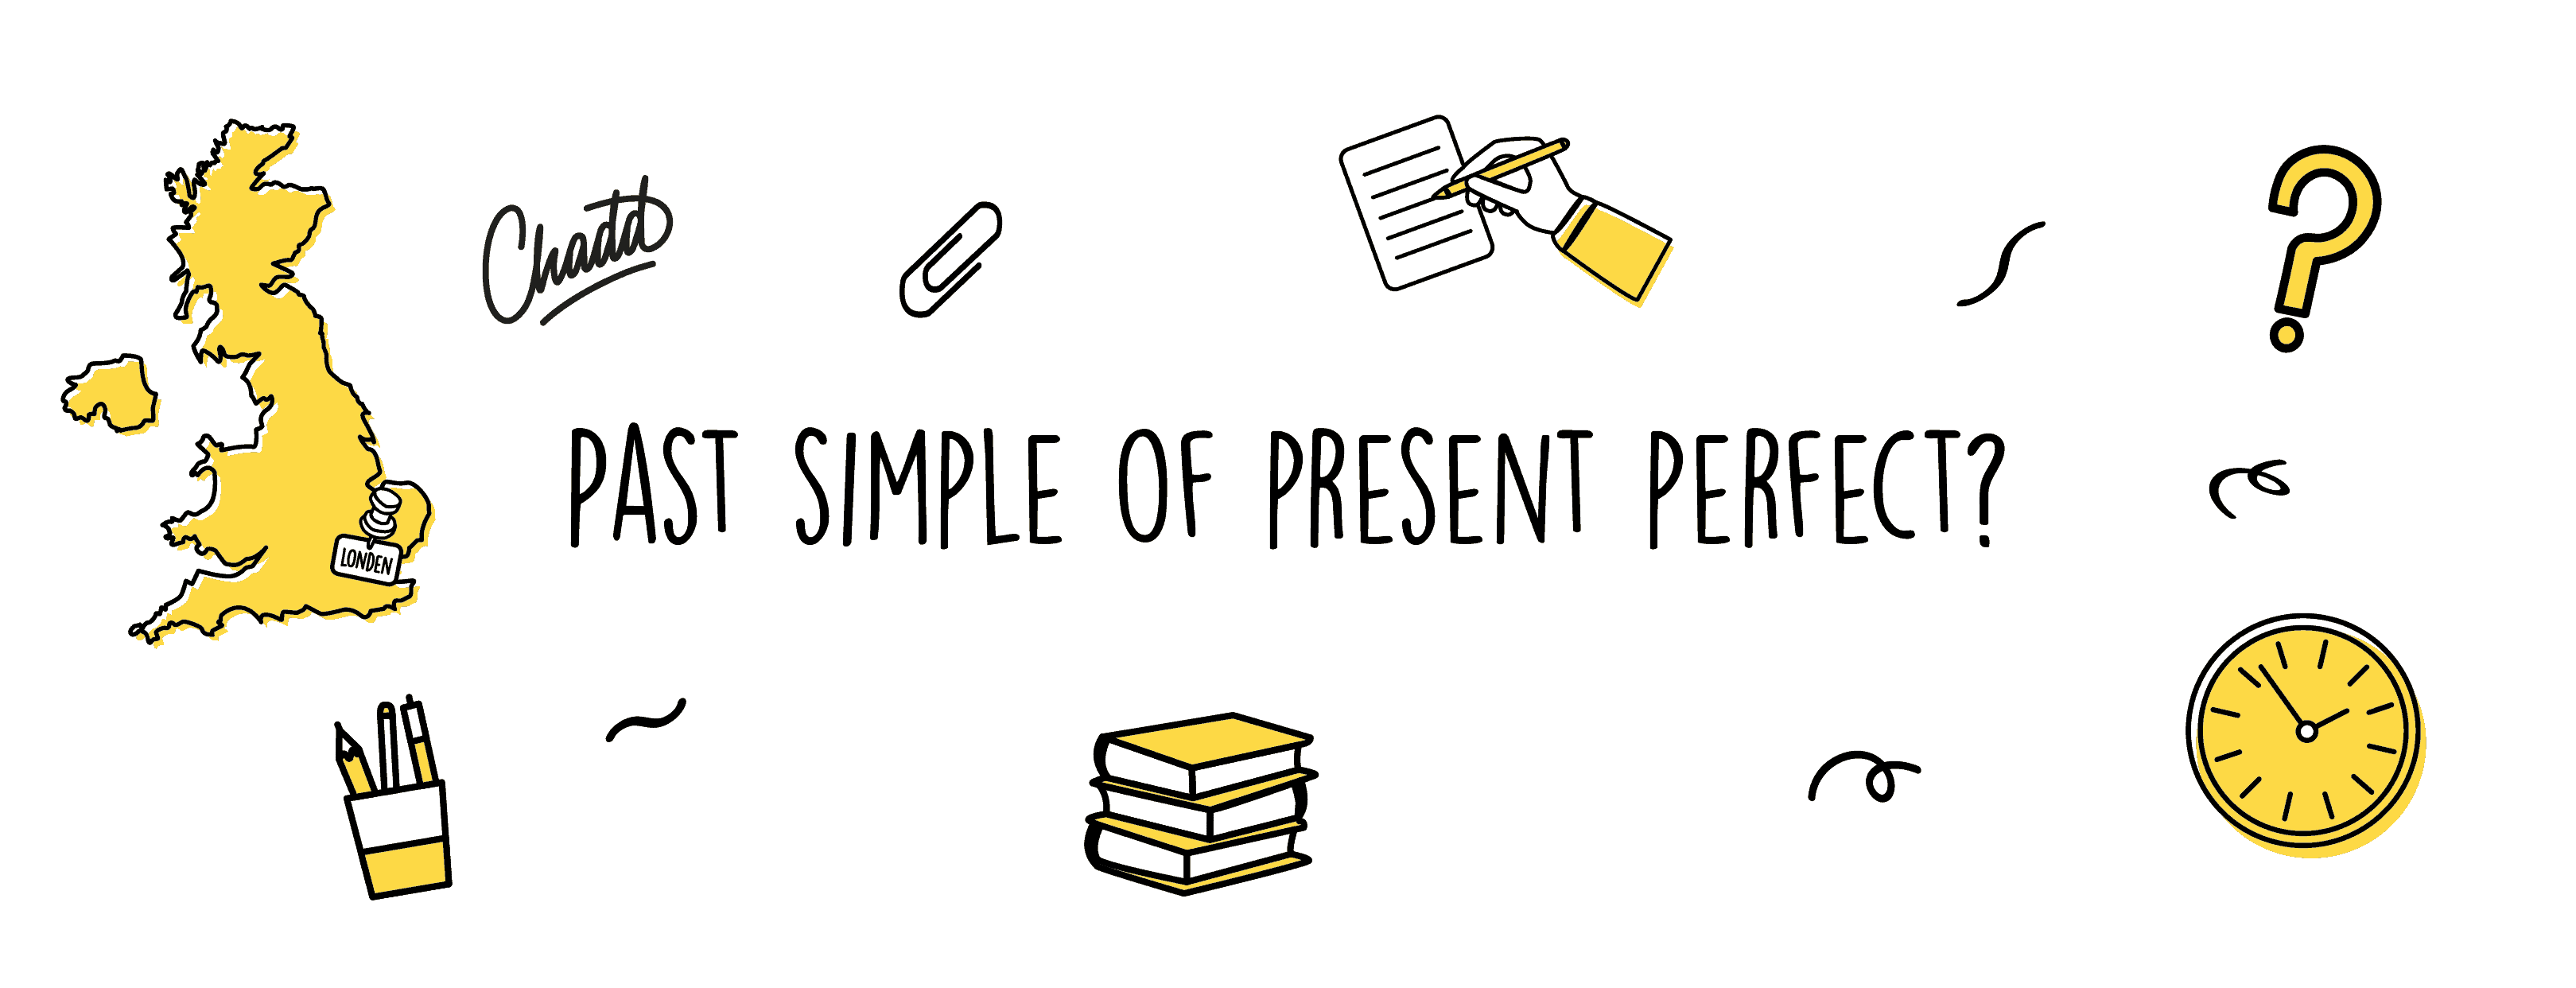 past simple of present perfect